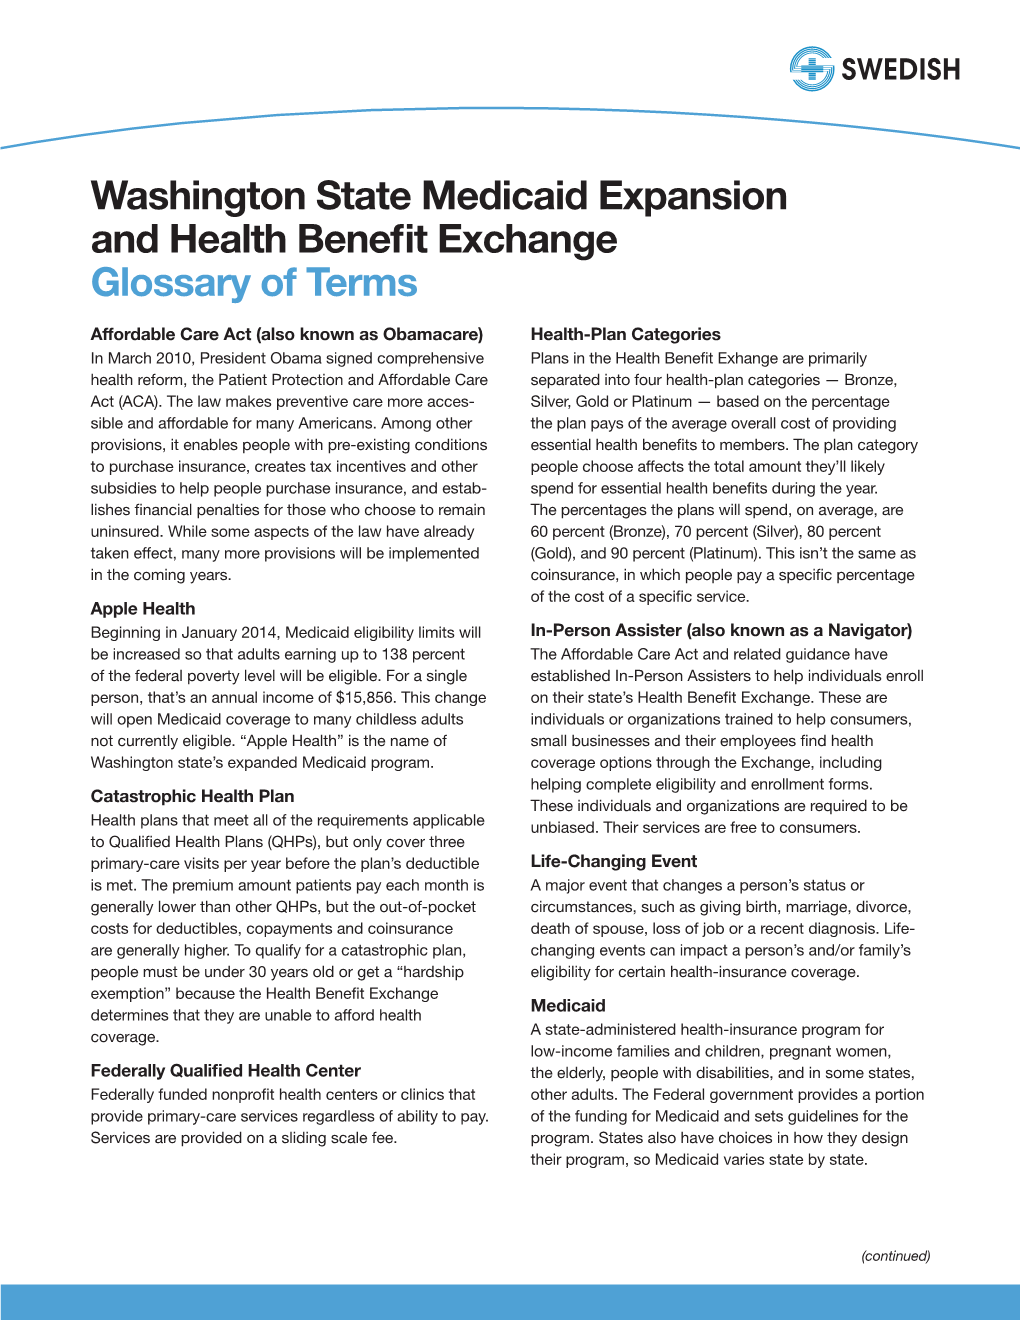 Washington State Medicaid Expansion and Health Benefit Exchange Glossary of Terms